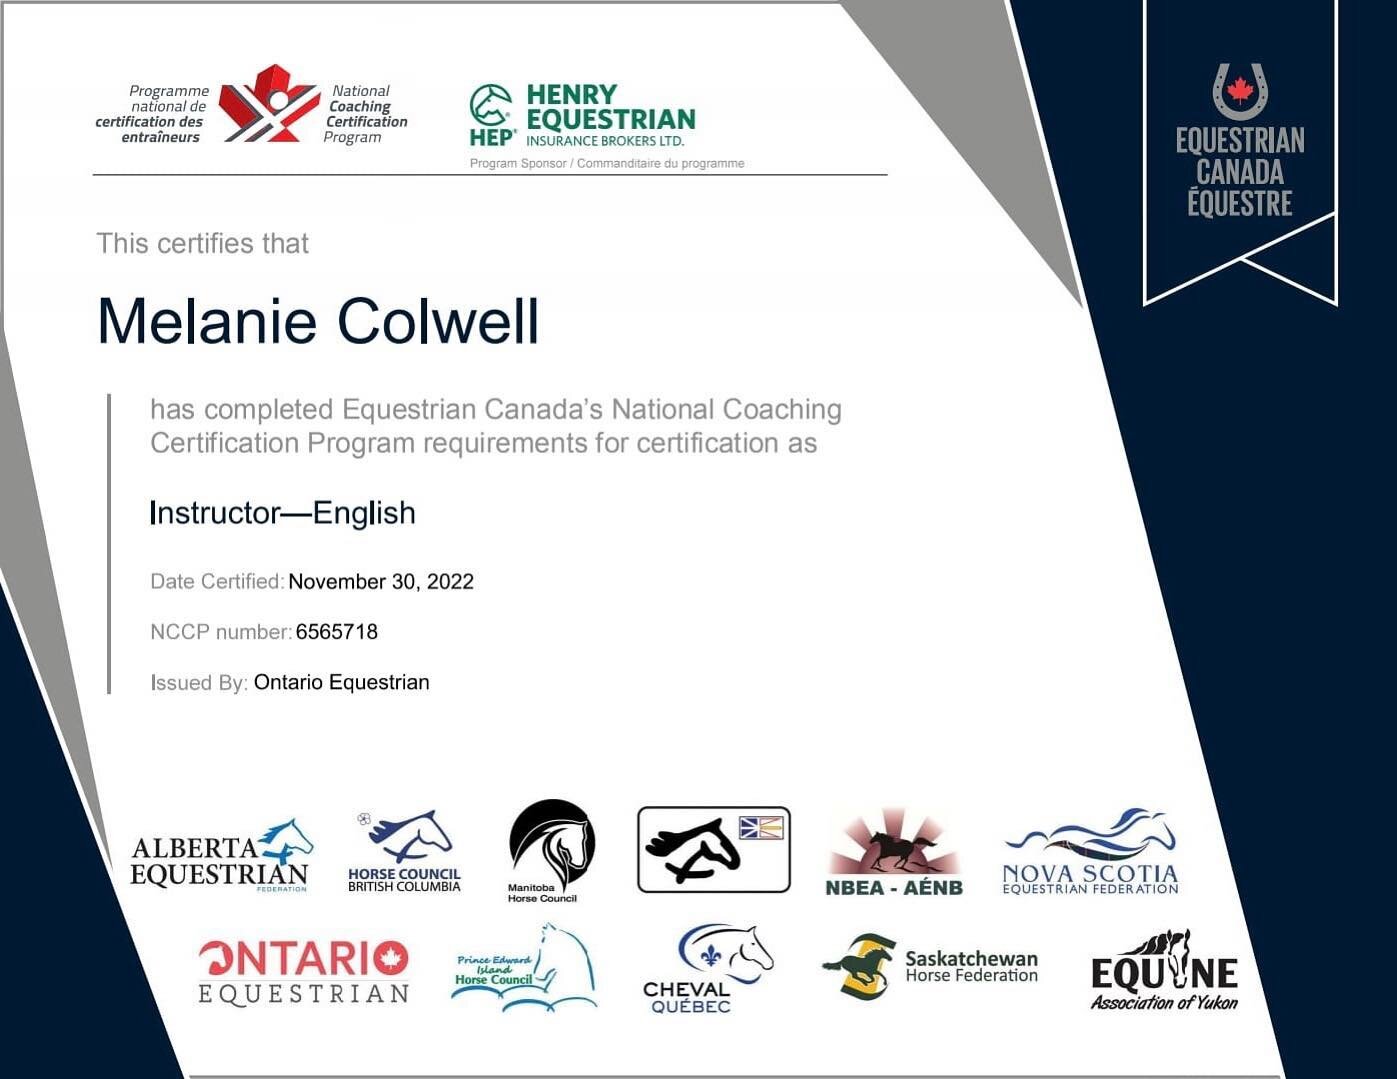 Congratulations to our own Melanie Colwell on completing Equestrian Canada&rsquo;s National Coaching Certification Program, earning her &ldquo;Instructor - English&rdquo; certification! Melanie has demonstrated a dedication to our sport and a desire 